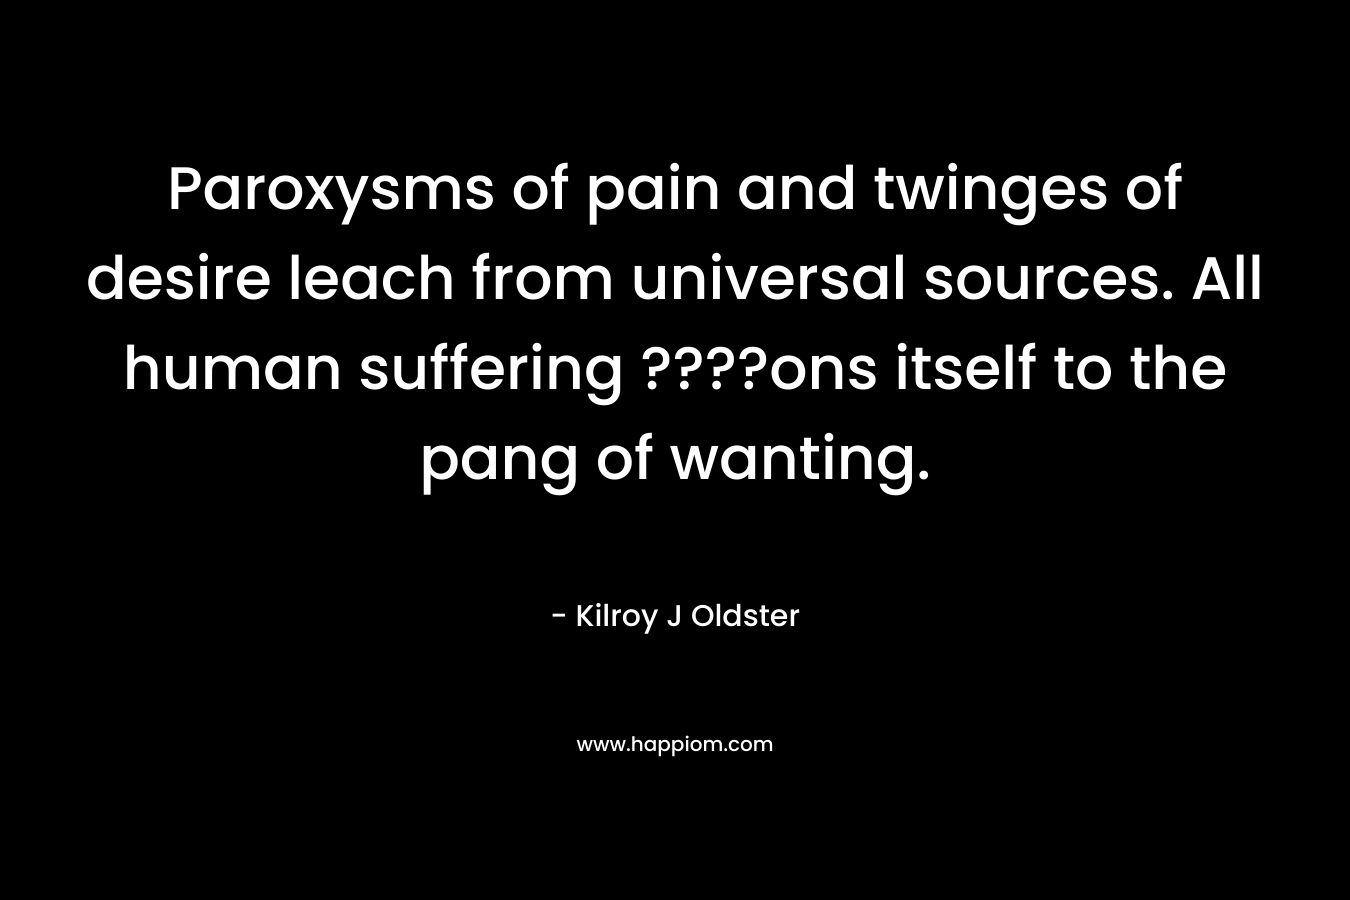 Paroxysms of pain and twinges of desire leach from universal sources. All human suffering ????ons itself to the pang of wanting. – Kilroy J Oldster